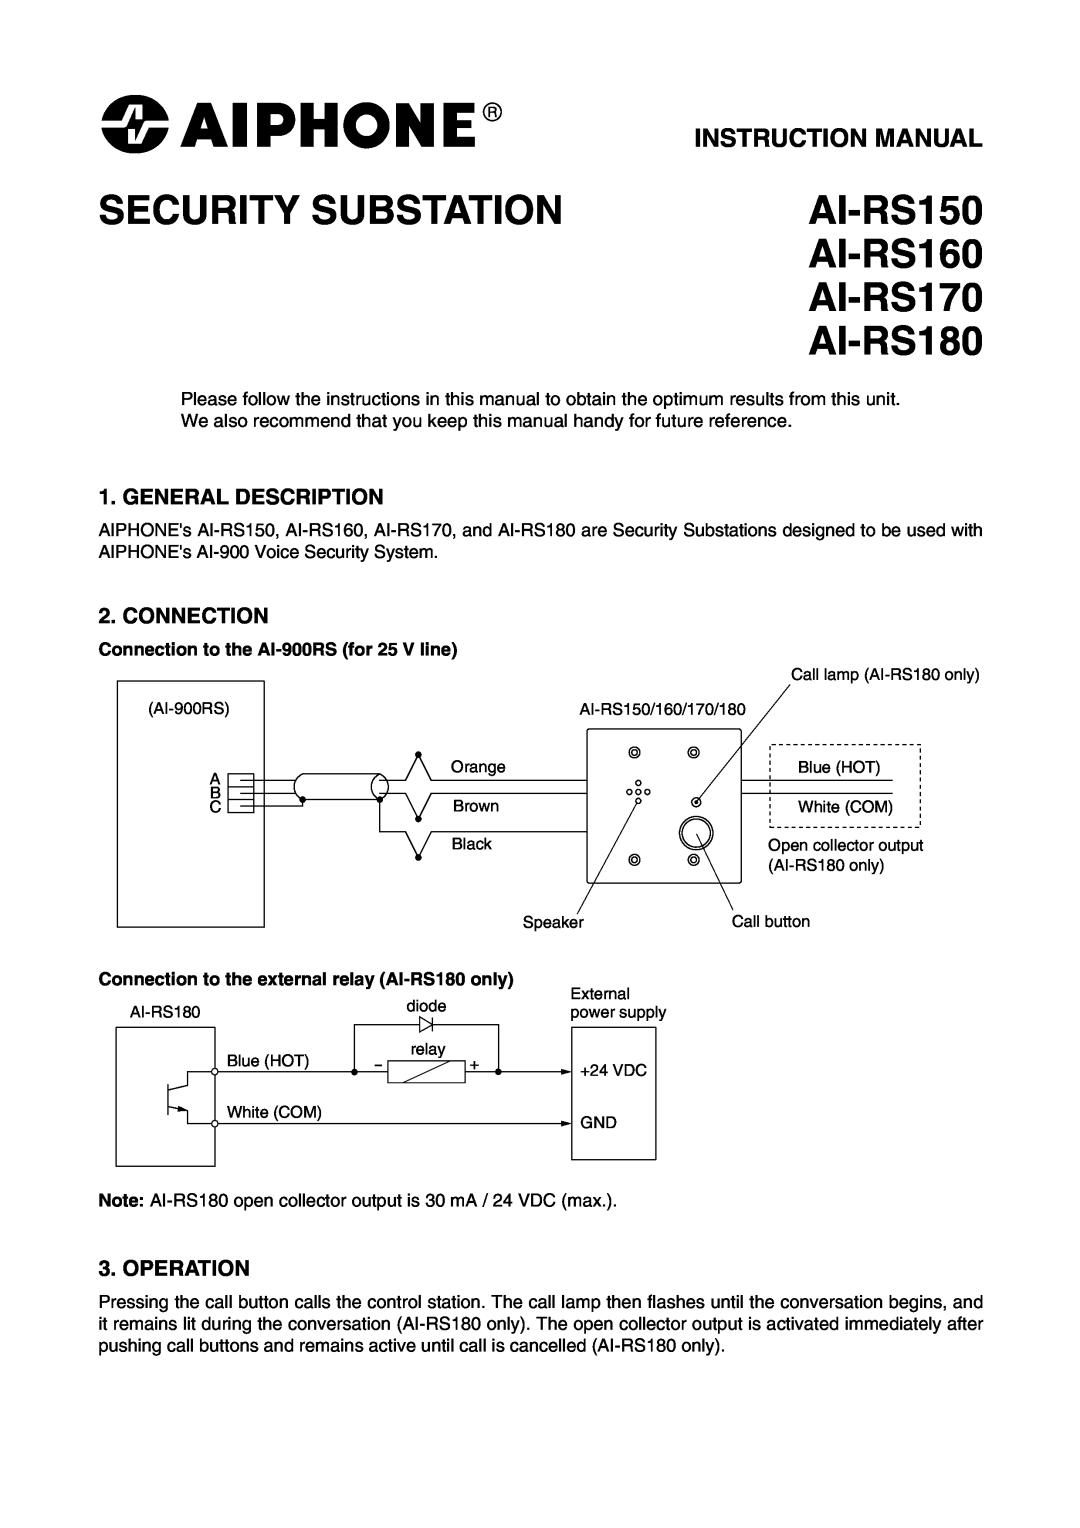 Aiphone AI-RS180 instruction manual General Description, Operation, Connection to the AI-900RSfor 25 V line, AI-RS150 